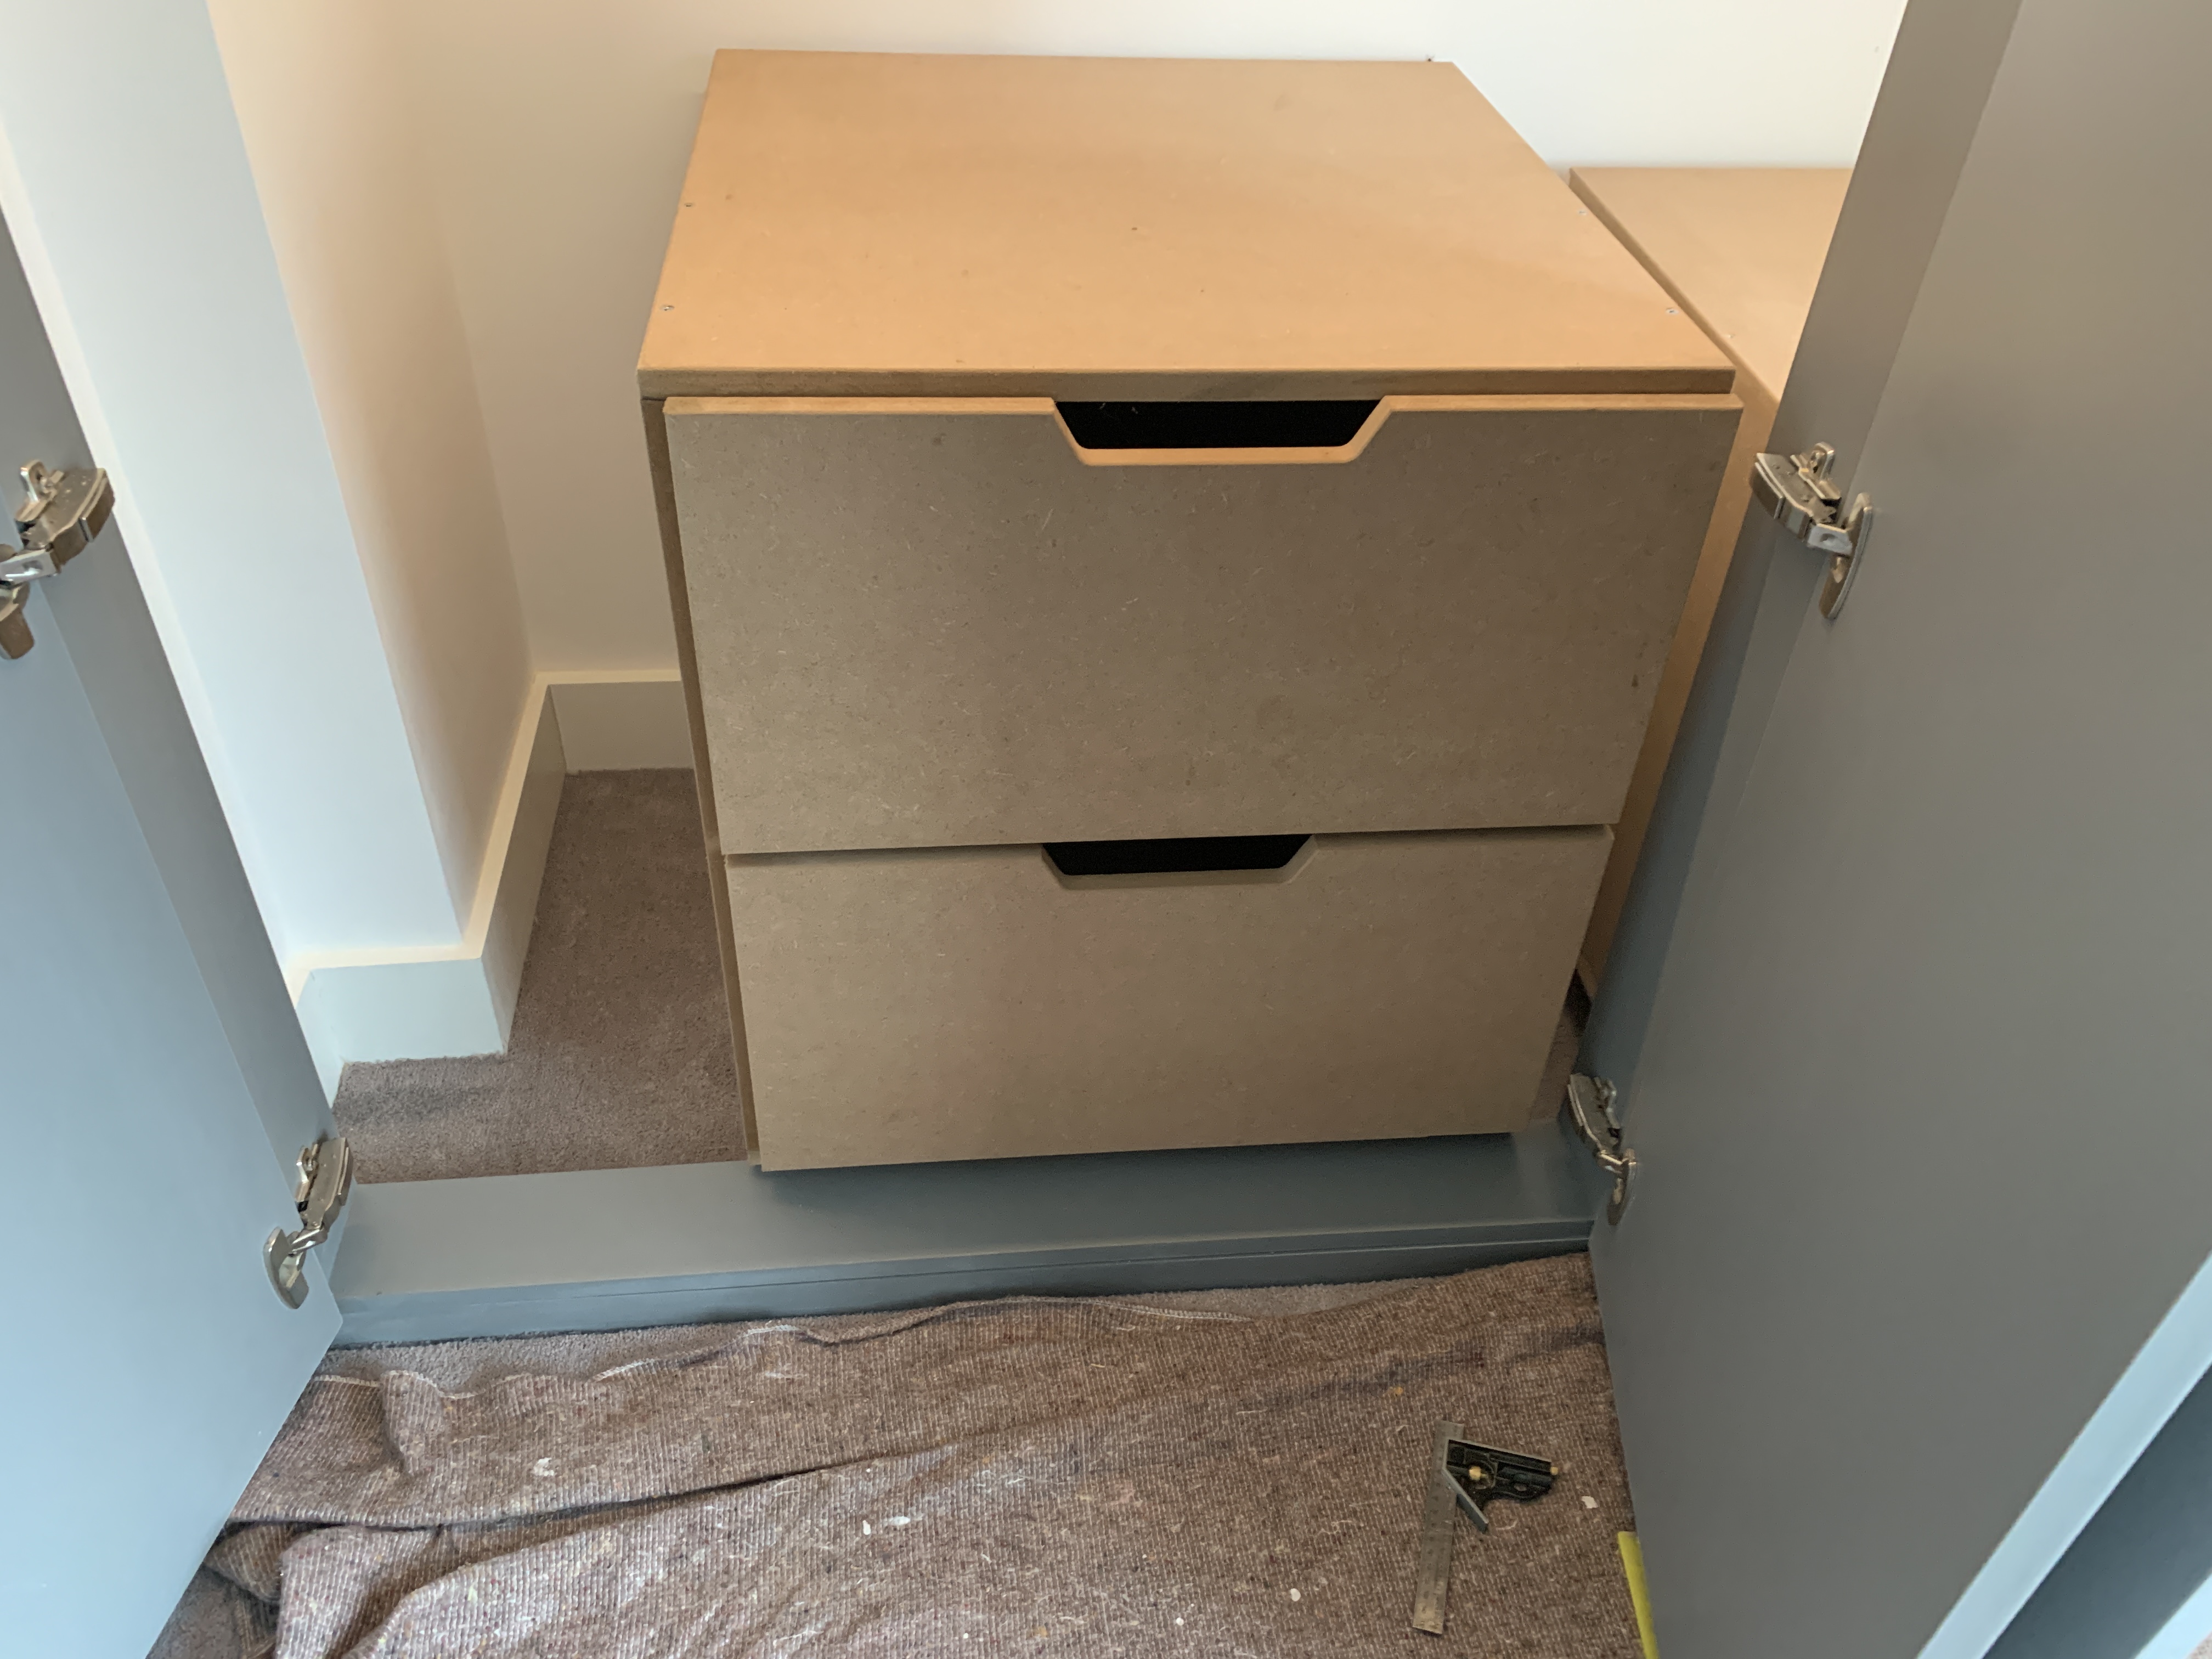 A small drawer unit built into the bottom of a built in wardrobe.